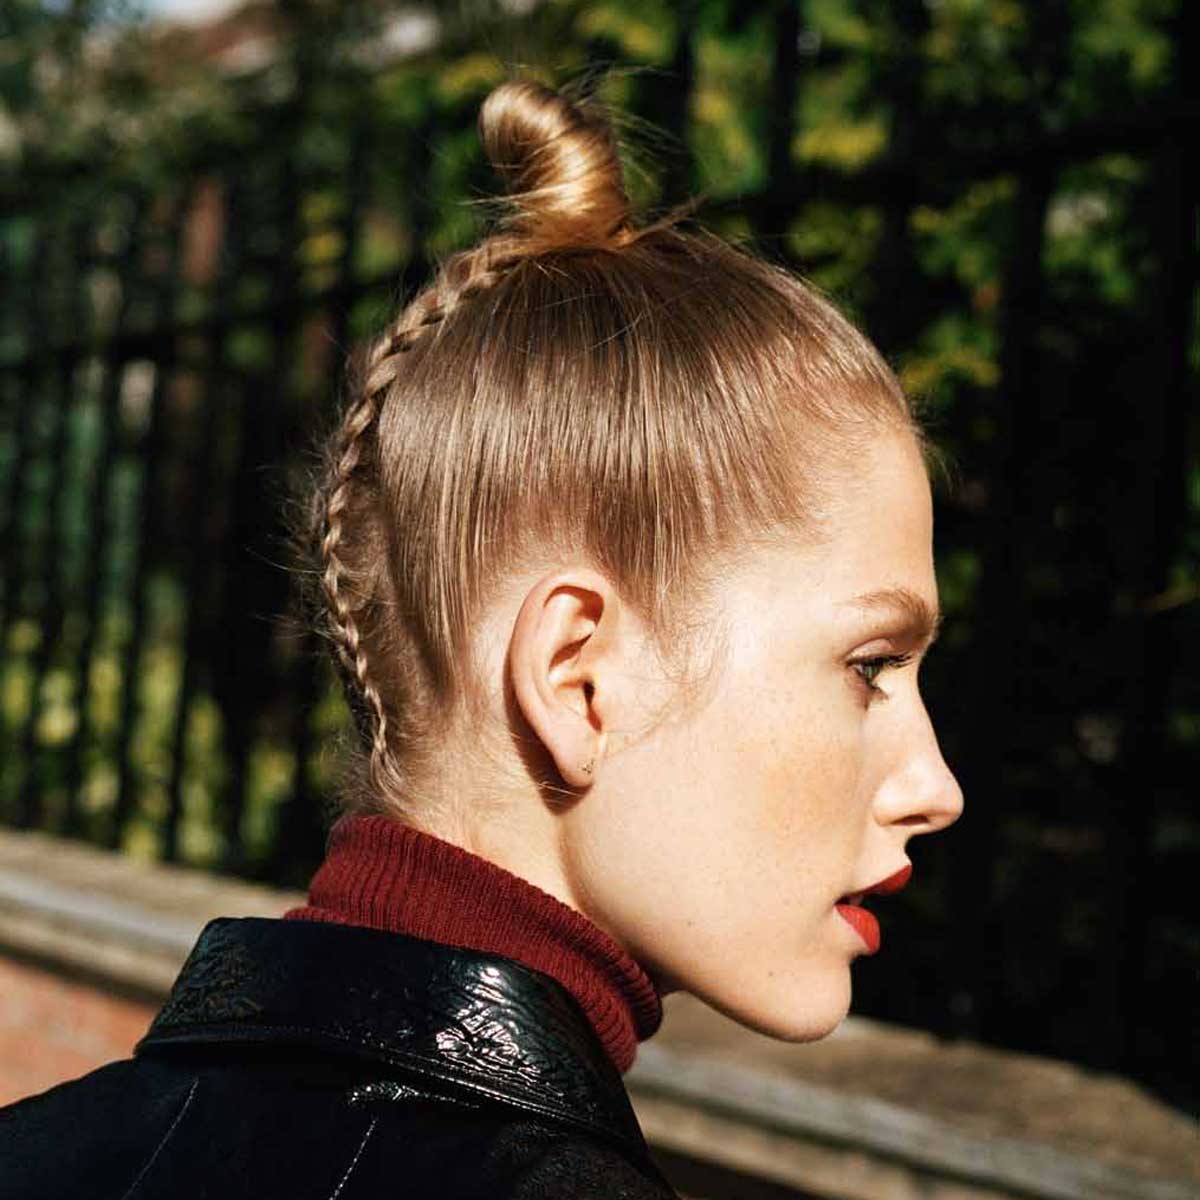 Dirty ballerina: Good girl gone bad. It's business at the front and party at the back with this tight top knot and unexpected braid at the back.